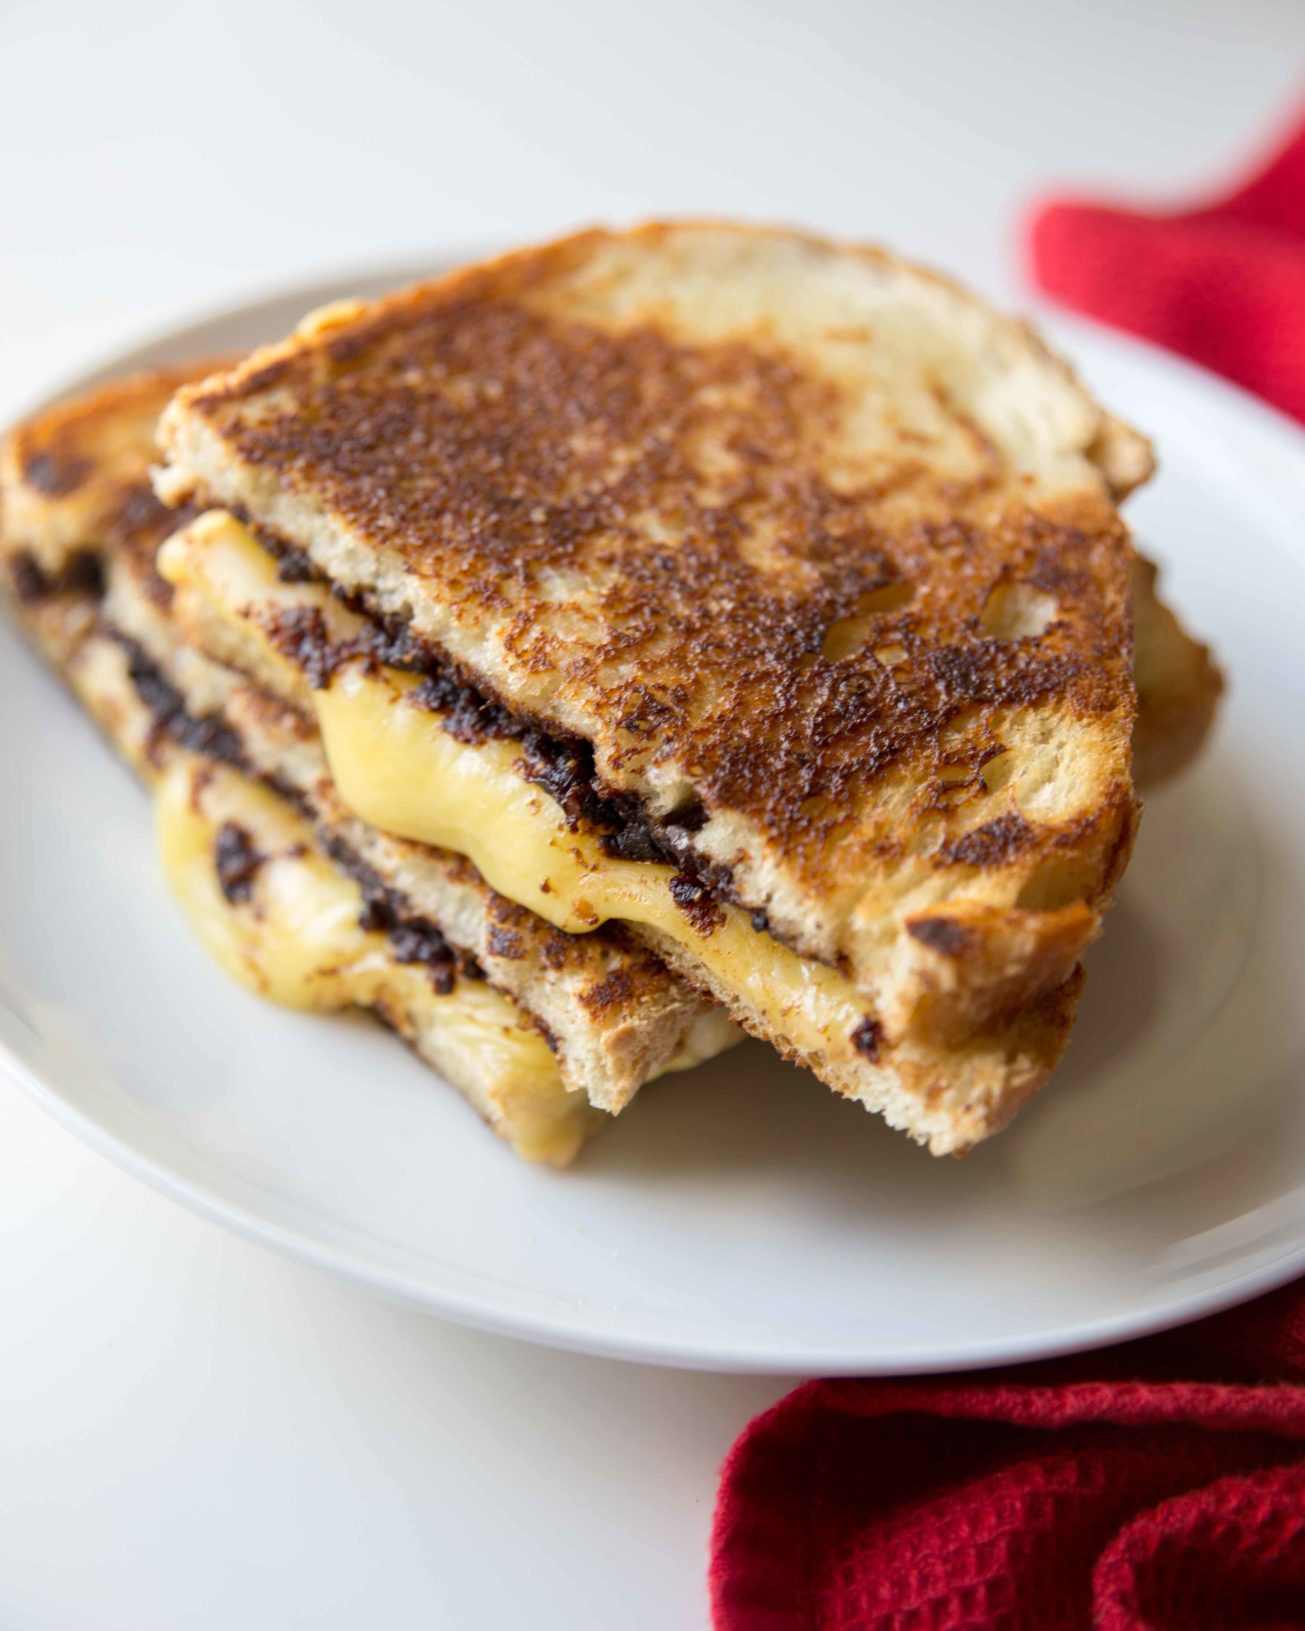 Make gourmet grilled cheese at home with easy balsamic fig jam. When you make grilled cheese with mayo the bread gets golden and crisp.